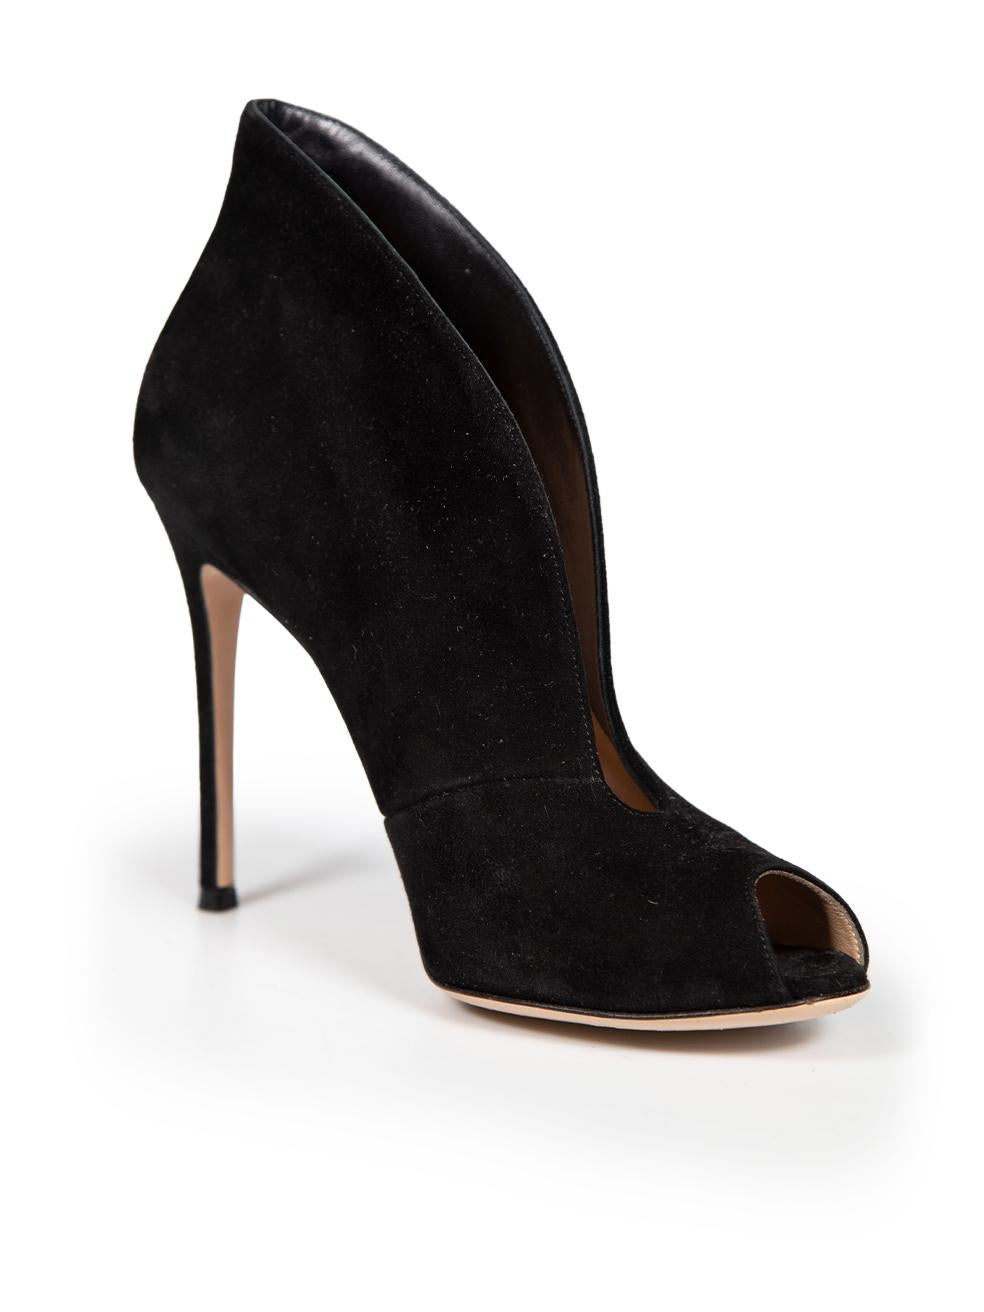 CONDITION is Very good. Minimal wear to heels is evident. Minimal abrasions to rear of left shoe on this used Gianvito Rossi designer resale item.
 
 
 
 Details
 
 
 Black
 
 Suede
 
 Vamp heels
 
 High collar
 
 Peep toe
 
 High heeled
 
 
 
 
 
